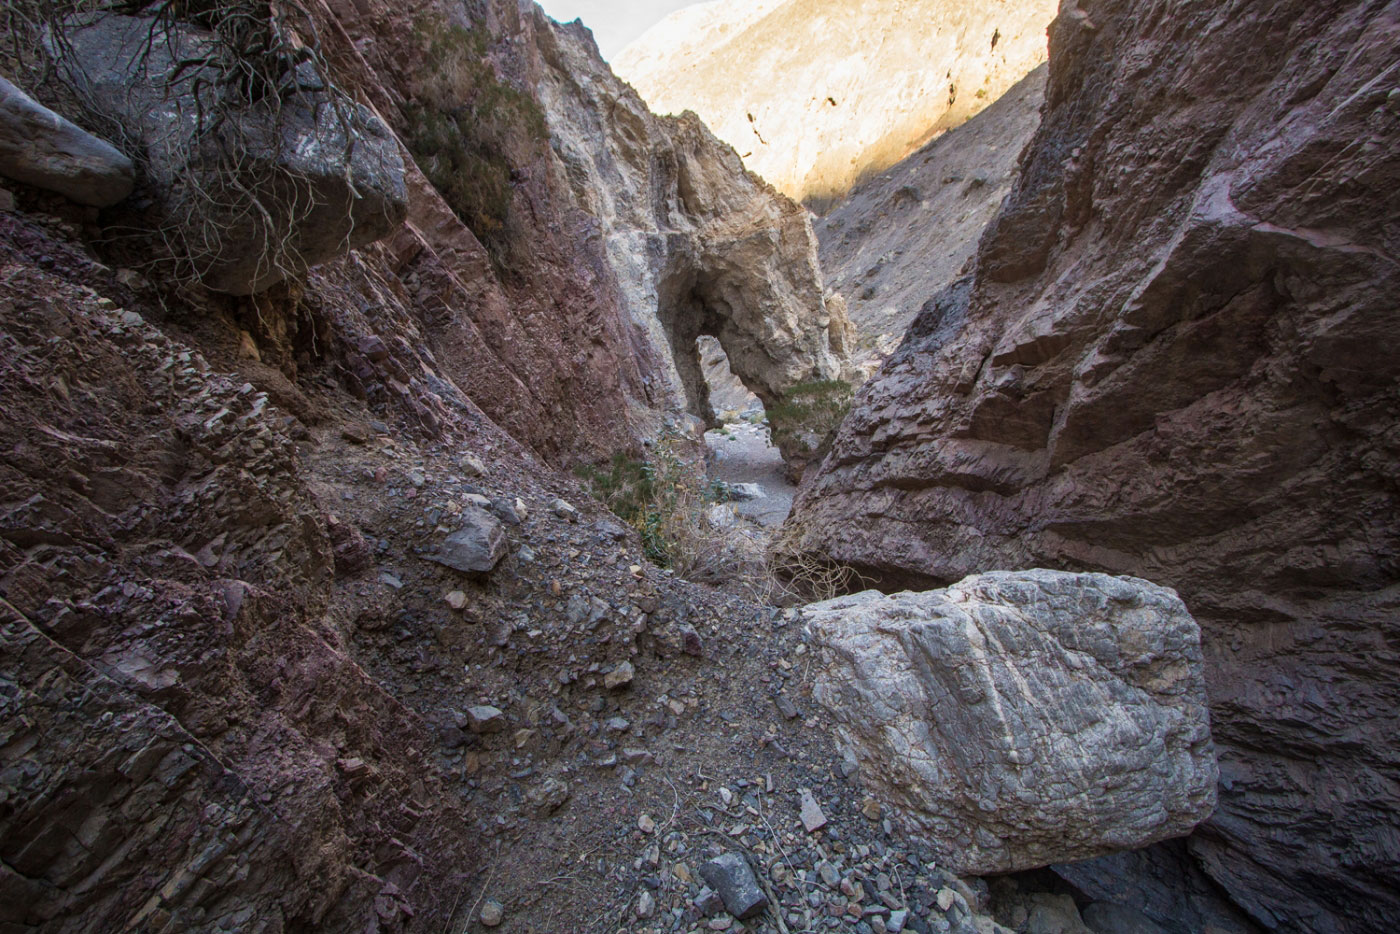 Hike Little Bridge Canyon in Death Valley National Park, California - Stav is Lost